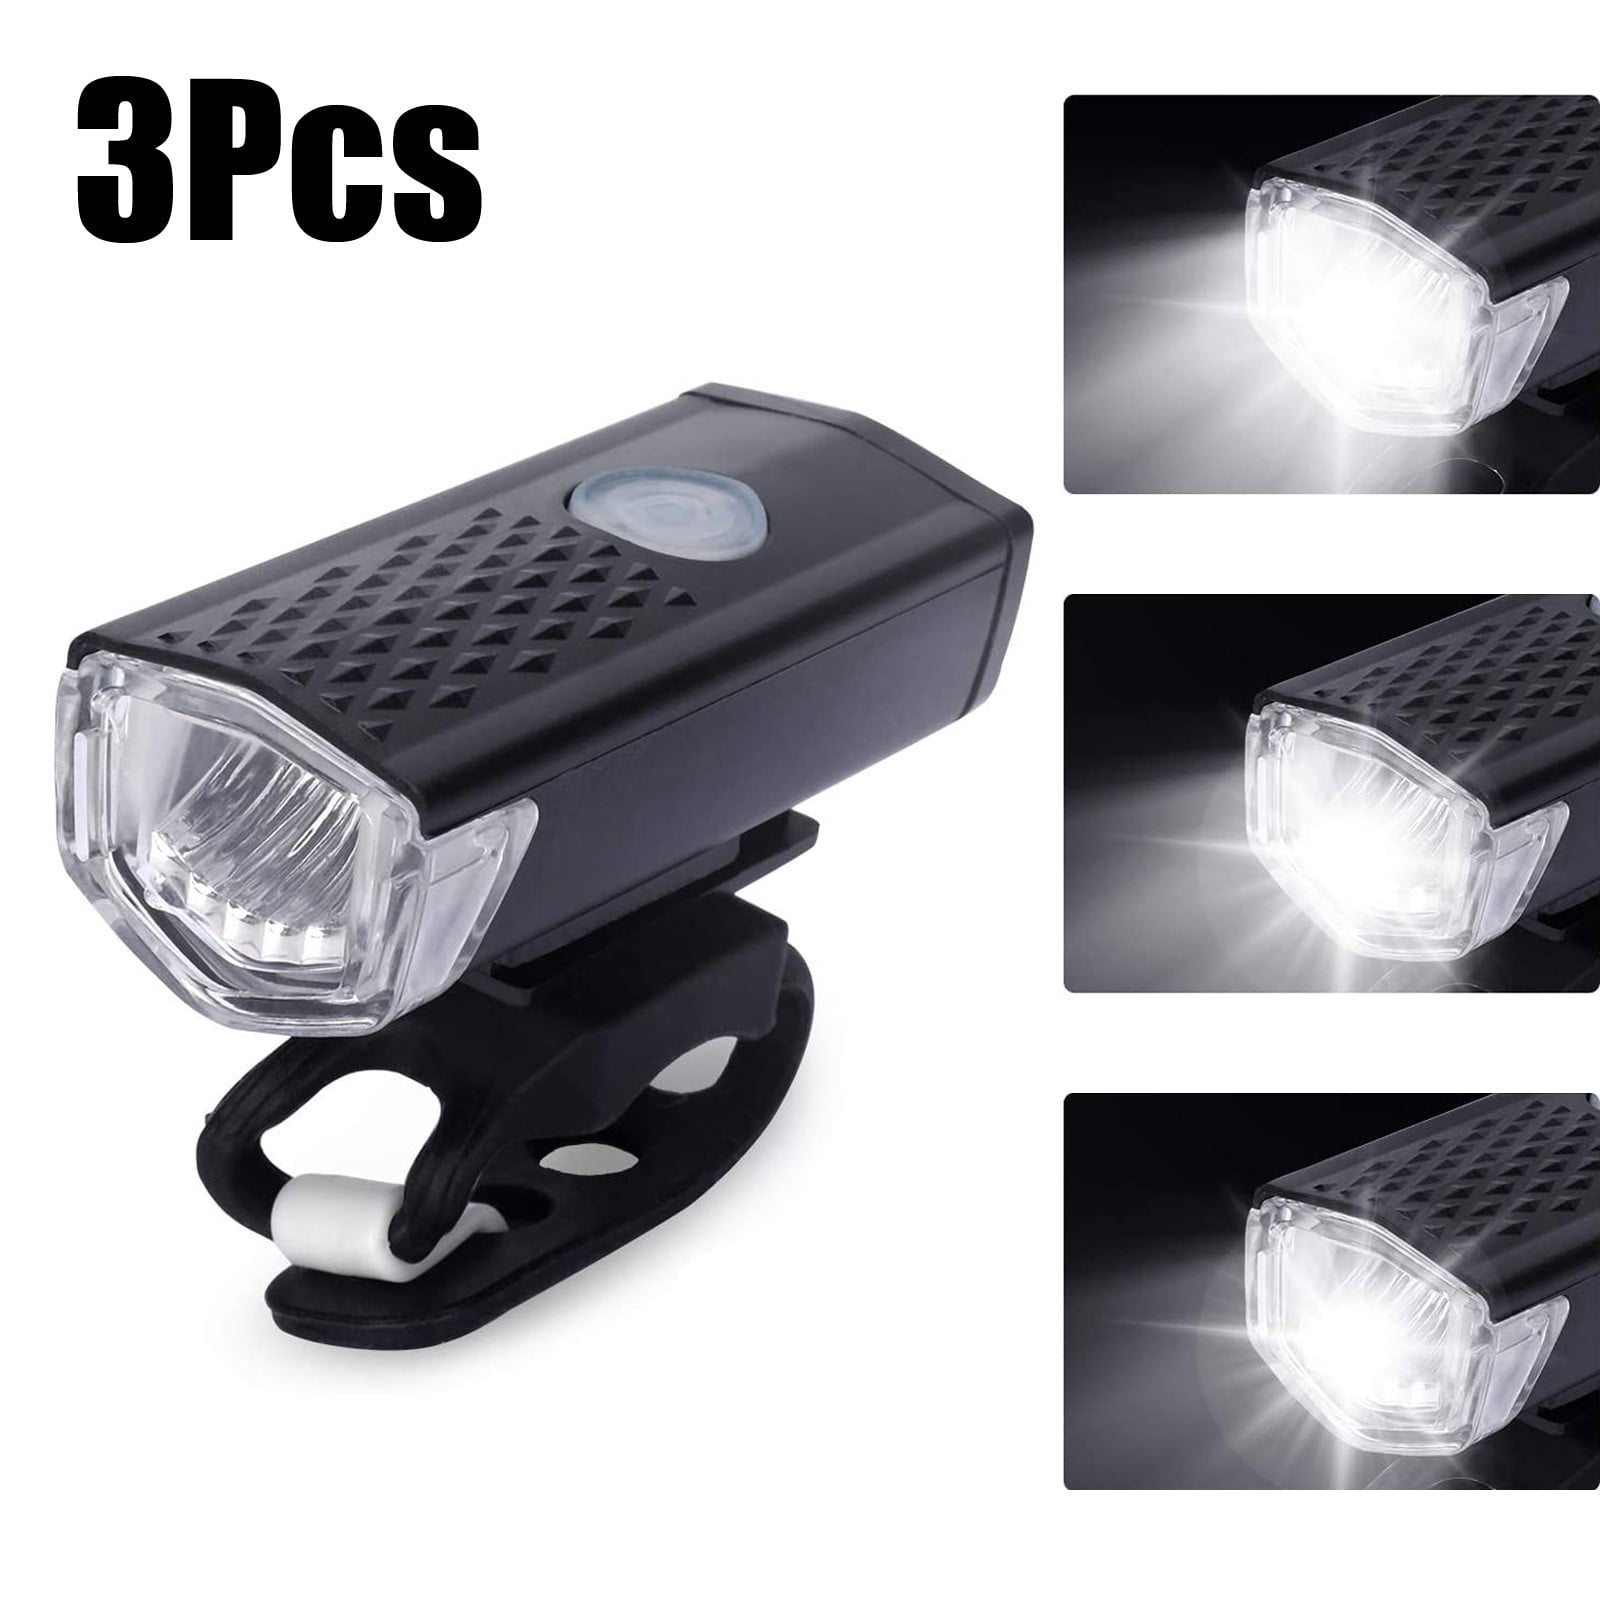 240lm USB LED Rechargeable Bike Front Head Light Headlamp Torch Waterproof Set 